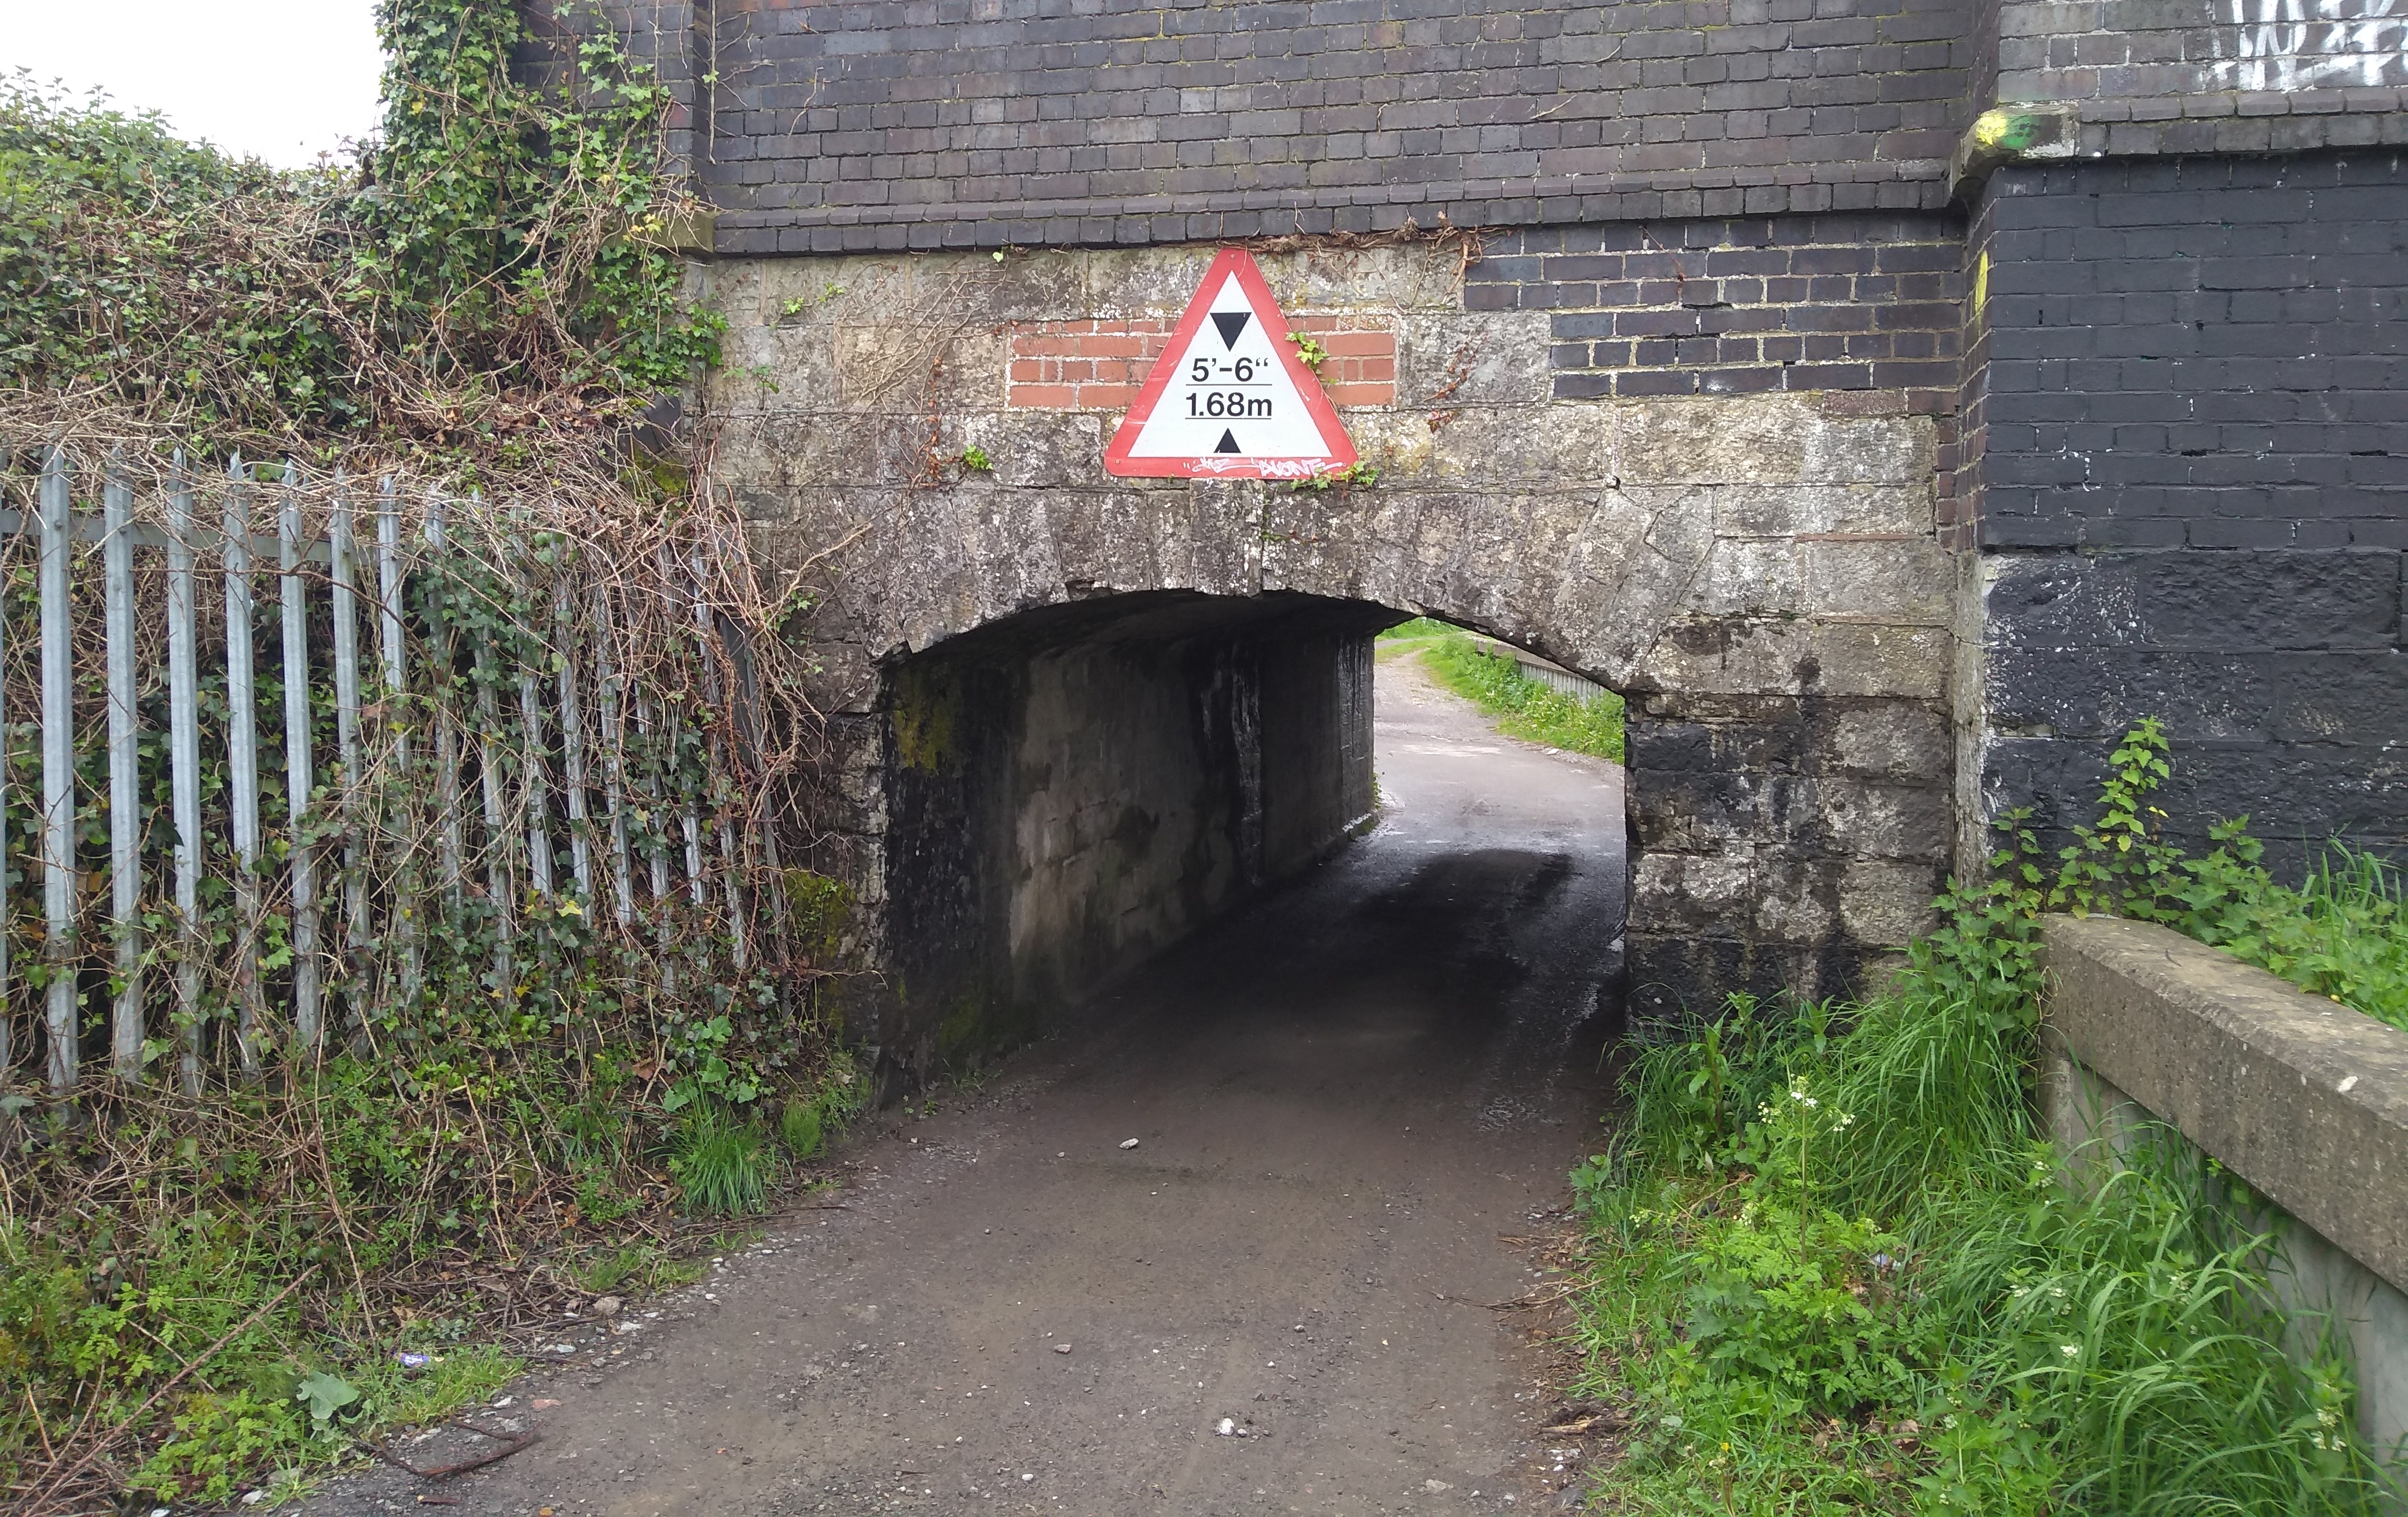 Small and low road bridge